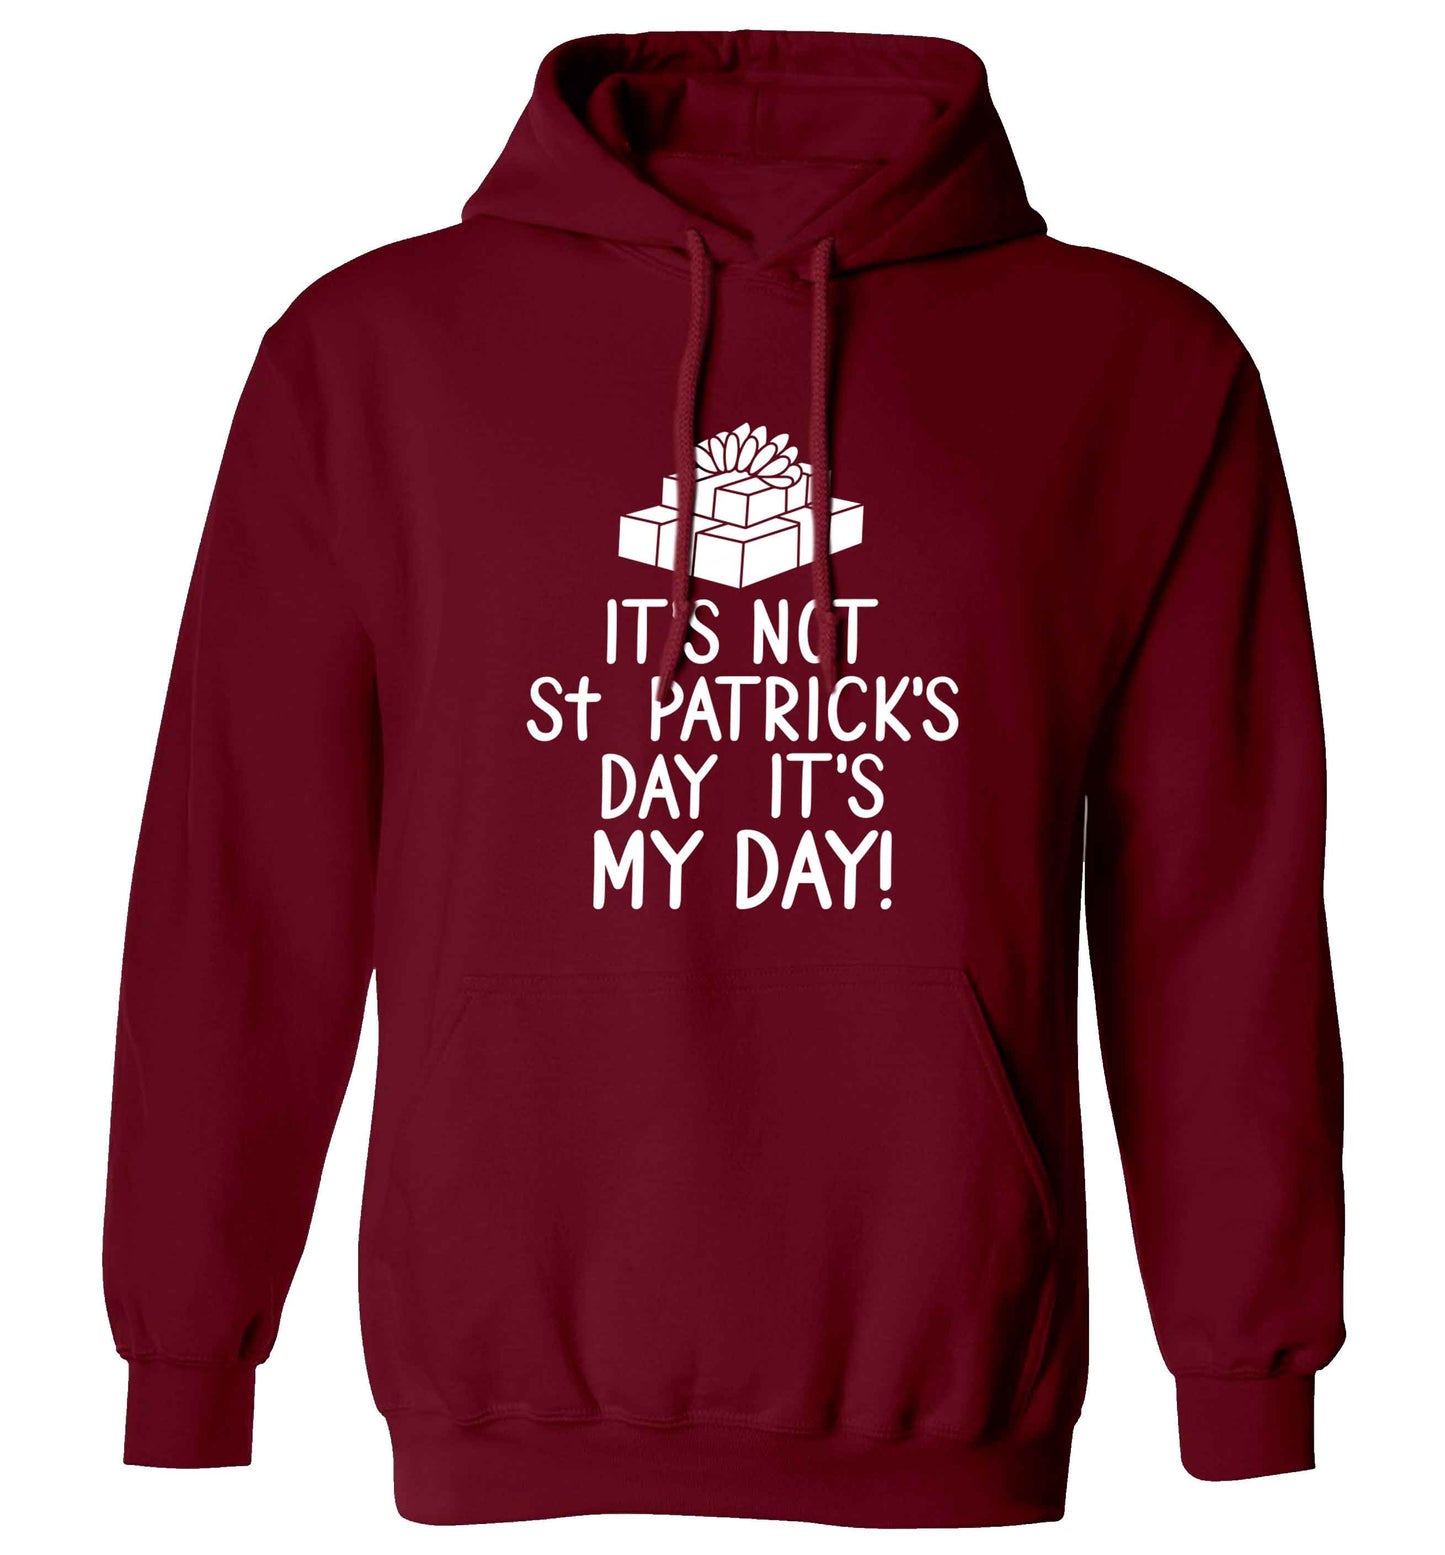 Funny gifts for your mum on mother's dayor her birthday! It's not St Patricks day it's my day adults unisex maroon hoodie 2XL